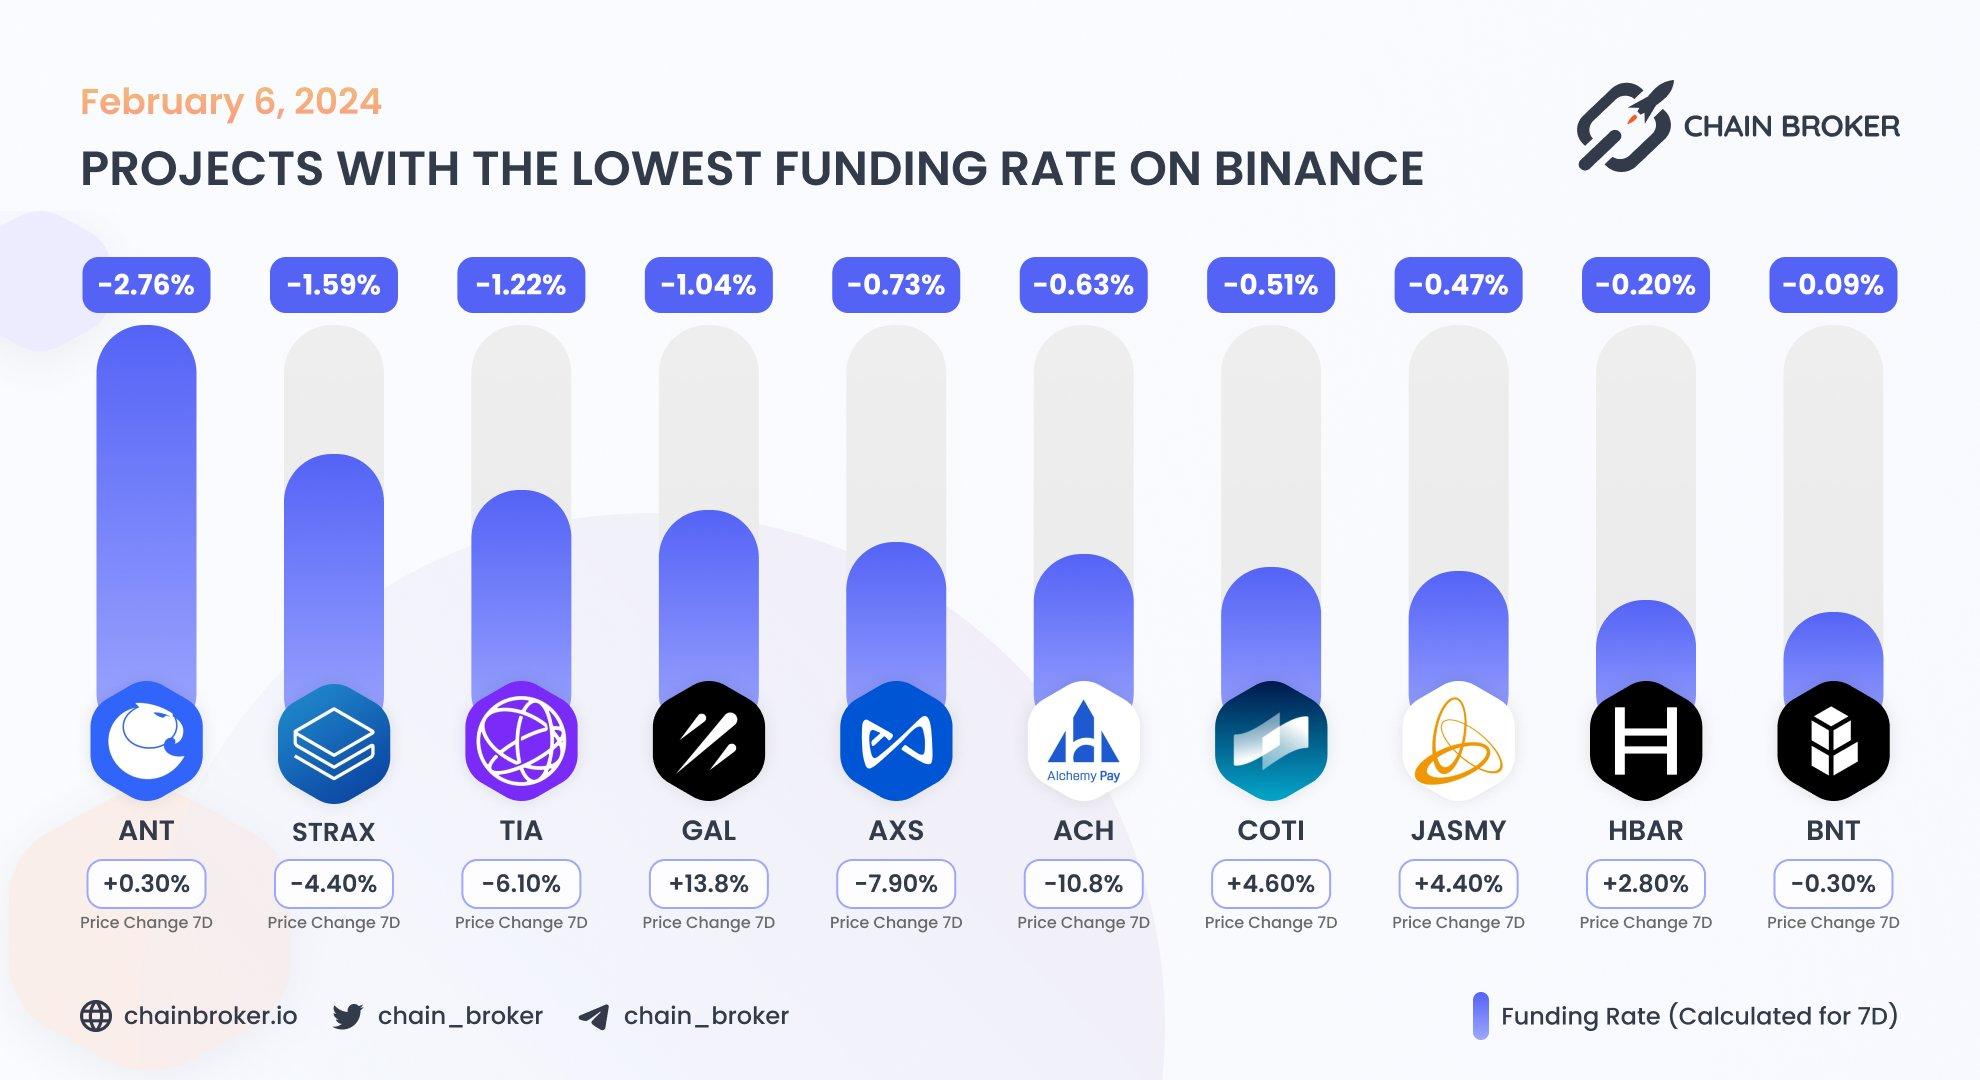 Top projects with the lowest funding rate